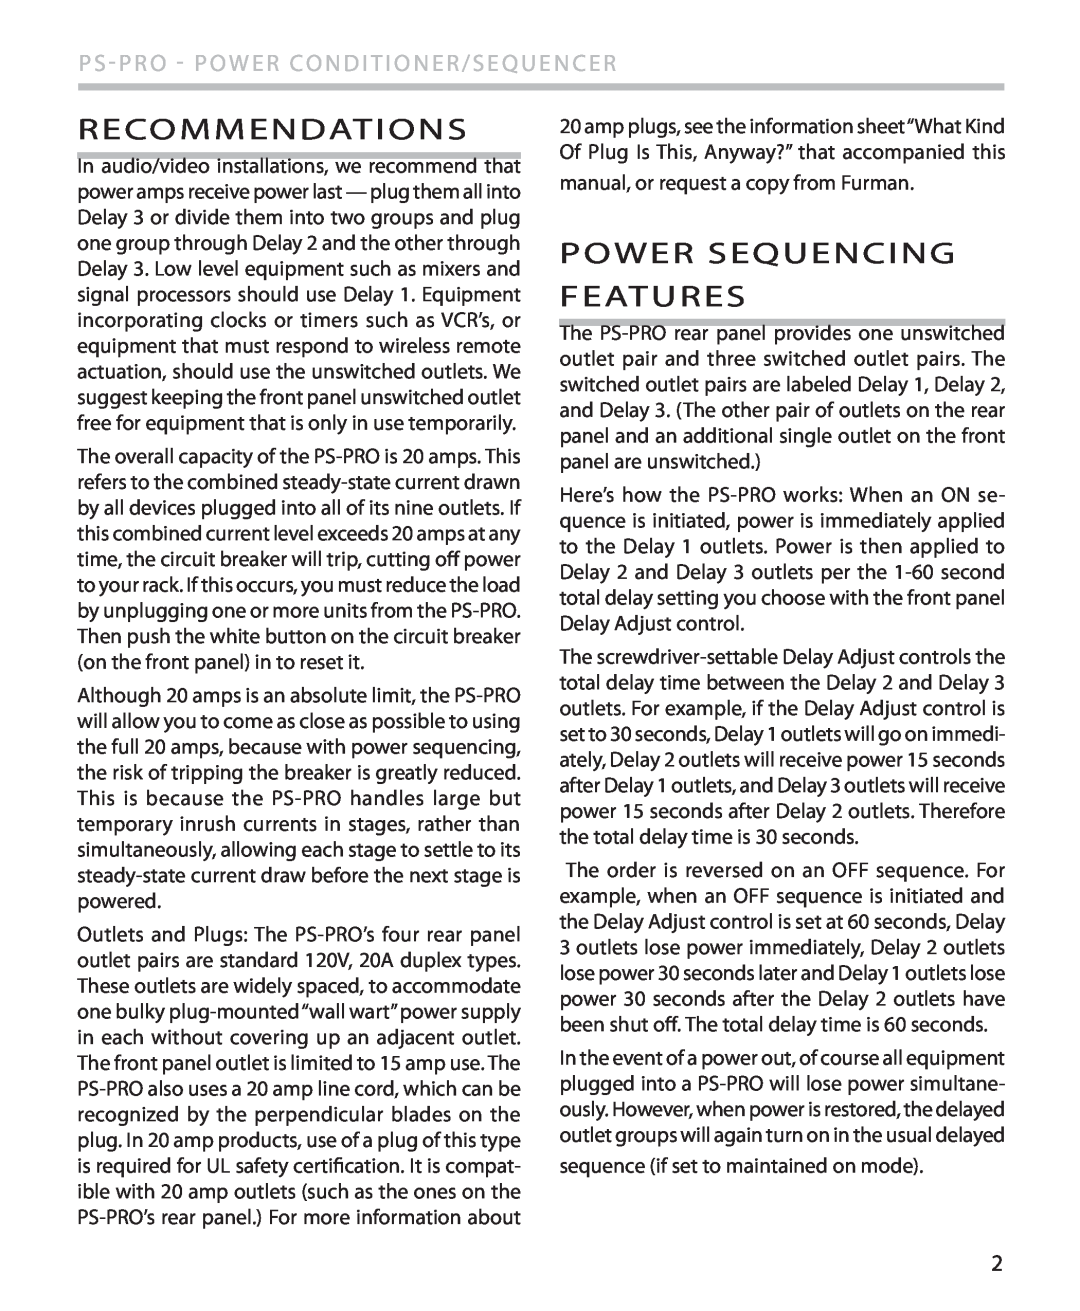 Furman Sound PS-PRO manual Recommendations, Power Sequencing Features, Ps - Pro - Power Conditioner/Sequencer 